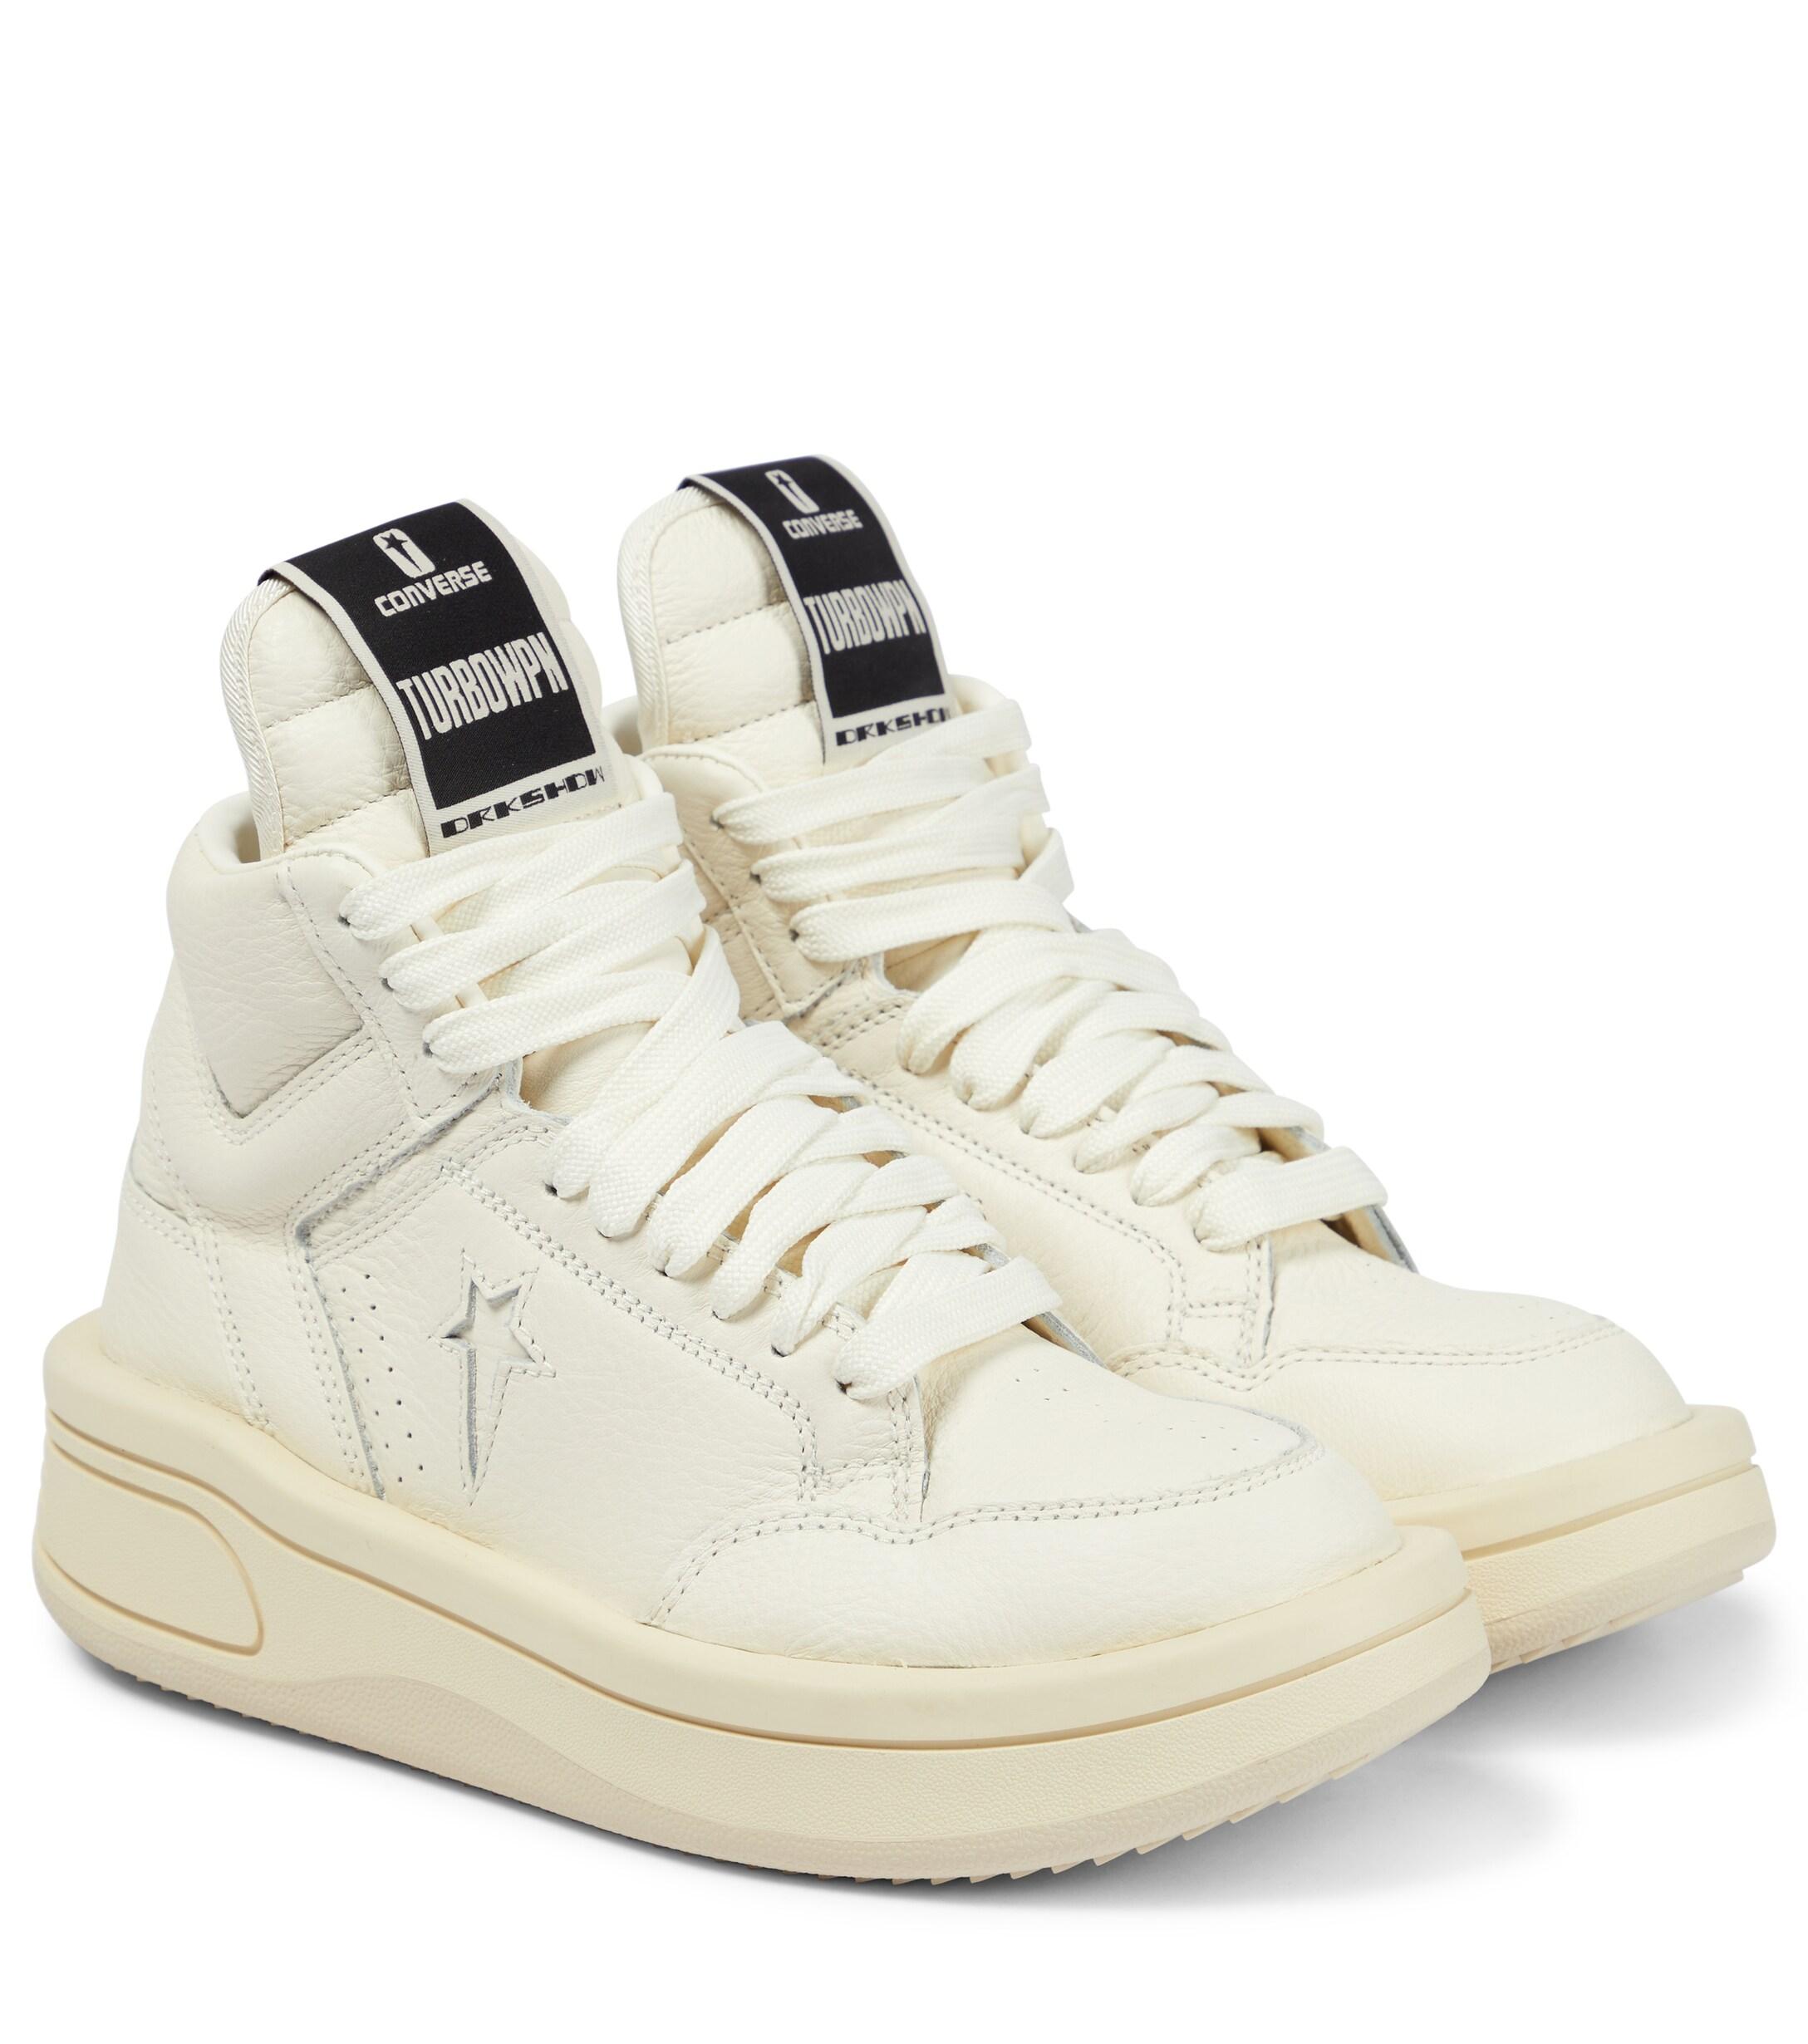 Rick Owens X Converse Drkshdw Turbowpn Leather High-top Sneakers